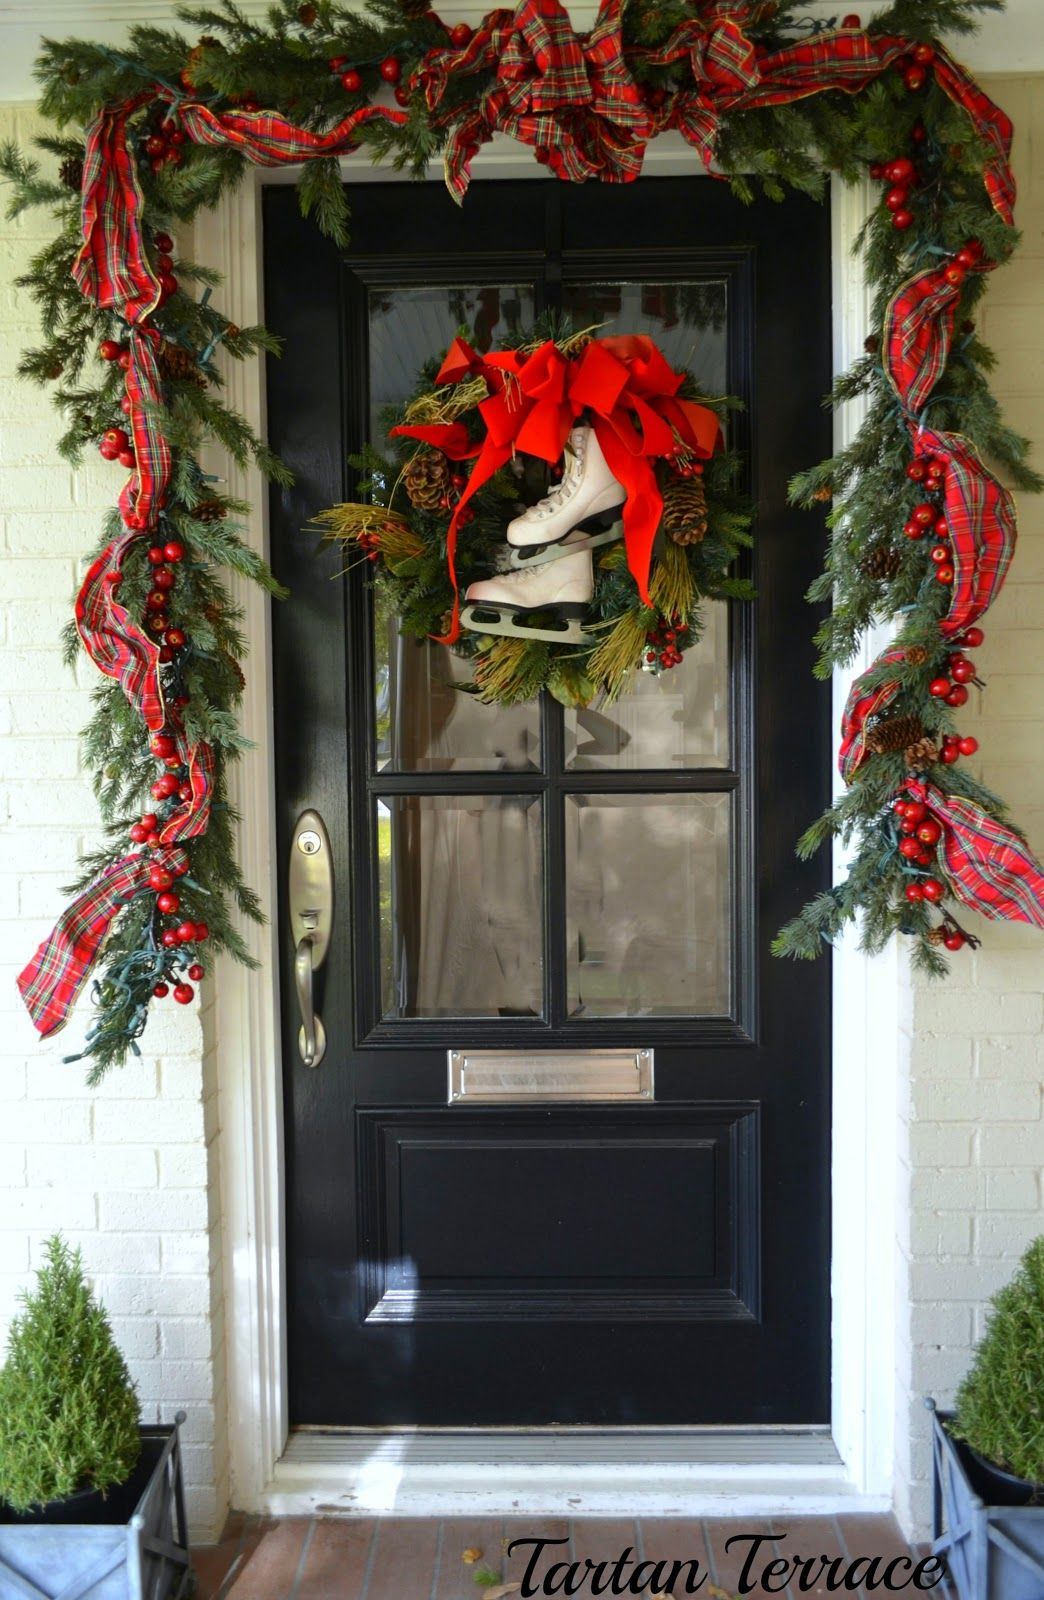 The white skates & red ribbon stand out against the black door ~ via Enchanted H